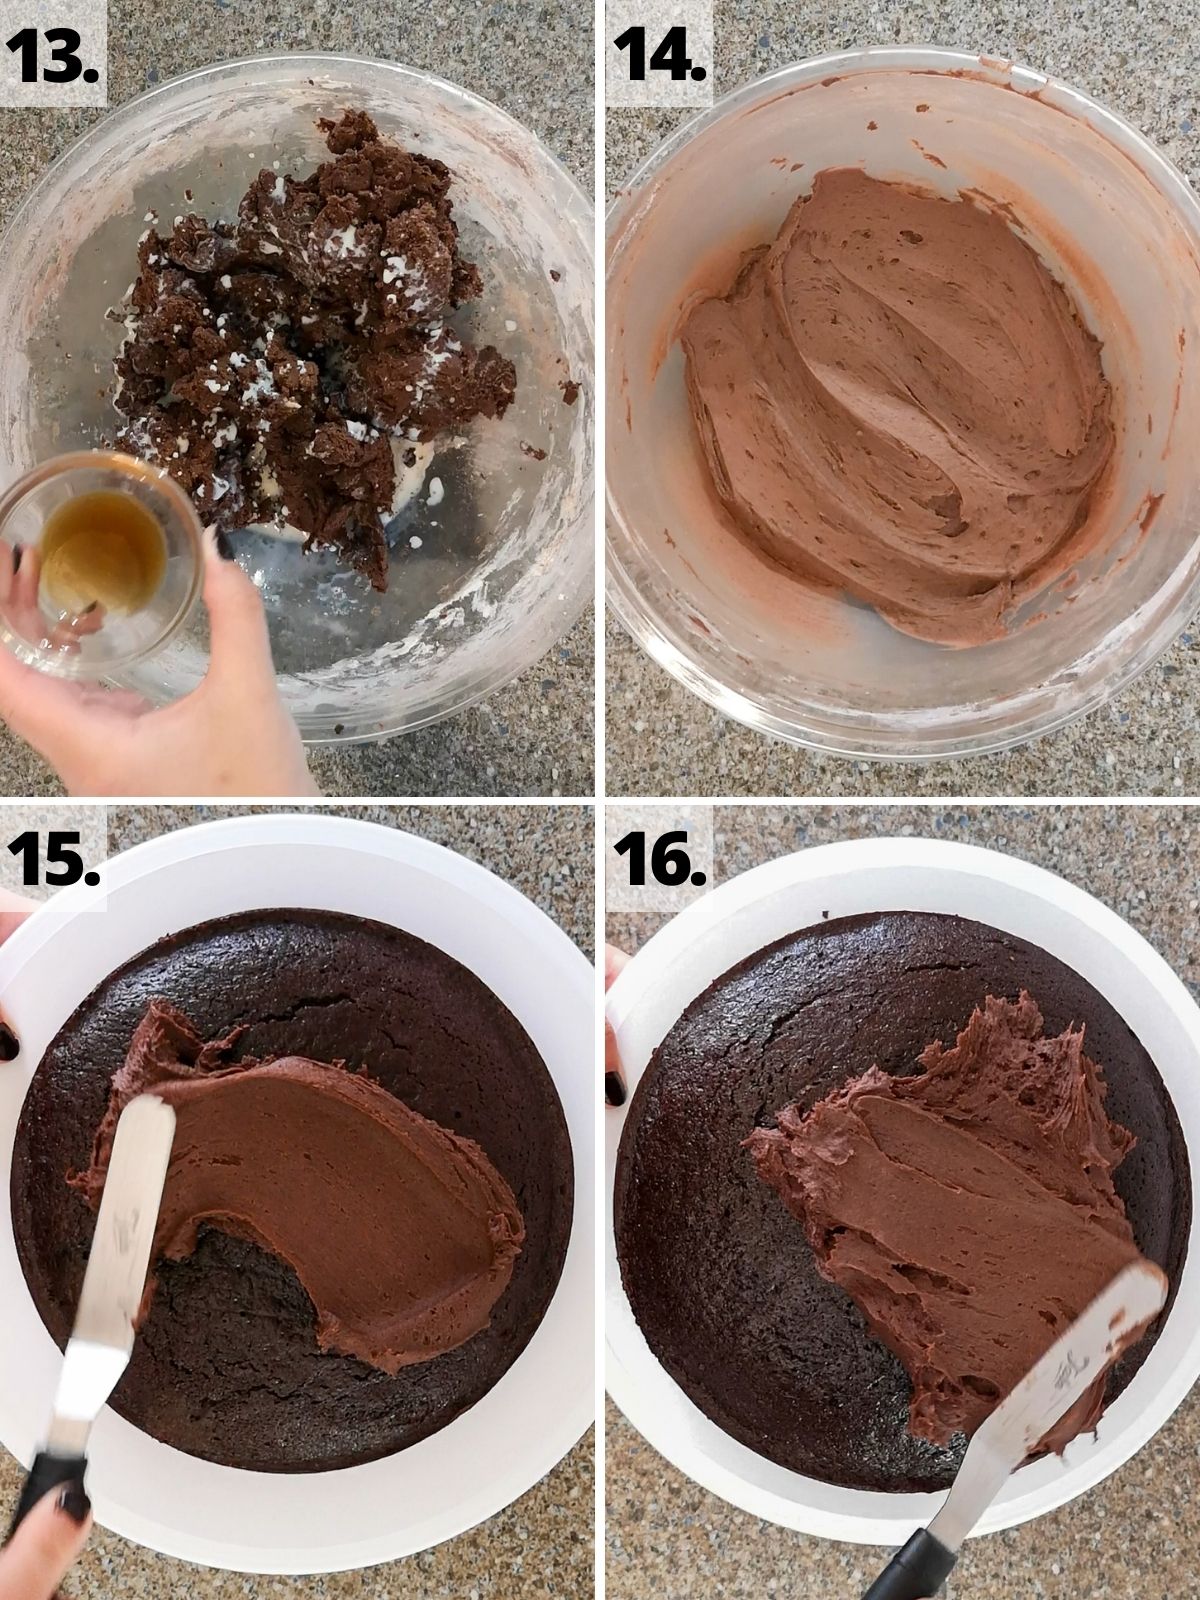 Chocolate cake recipe method steps 13-16 in a grid